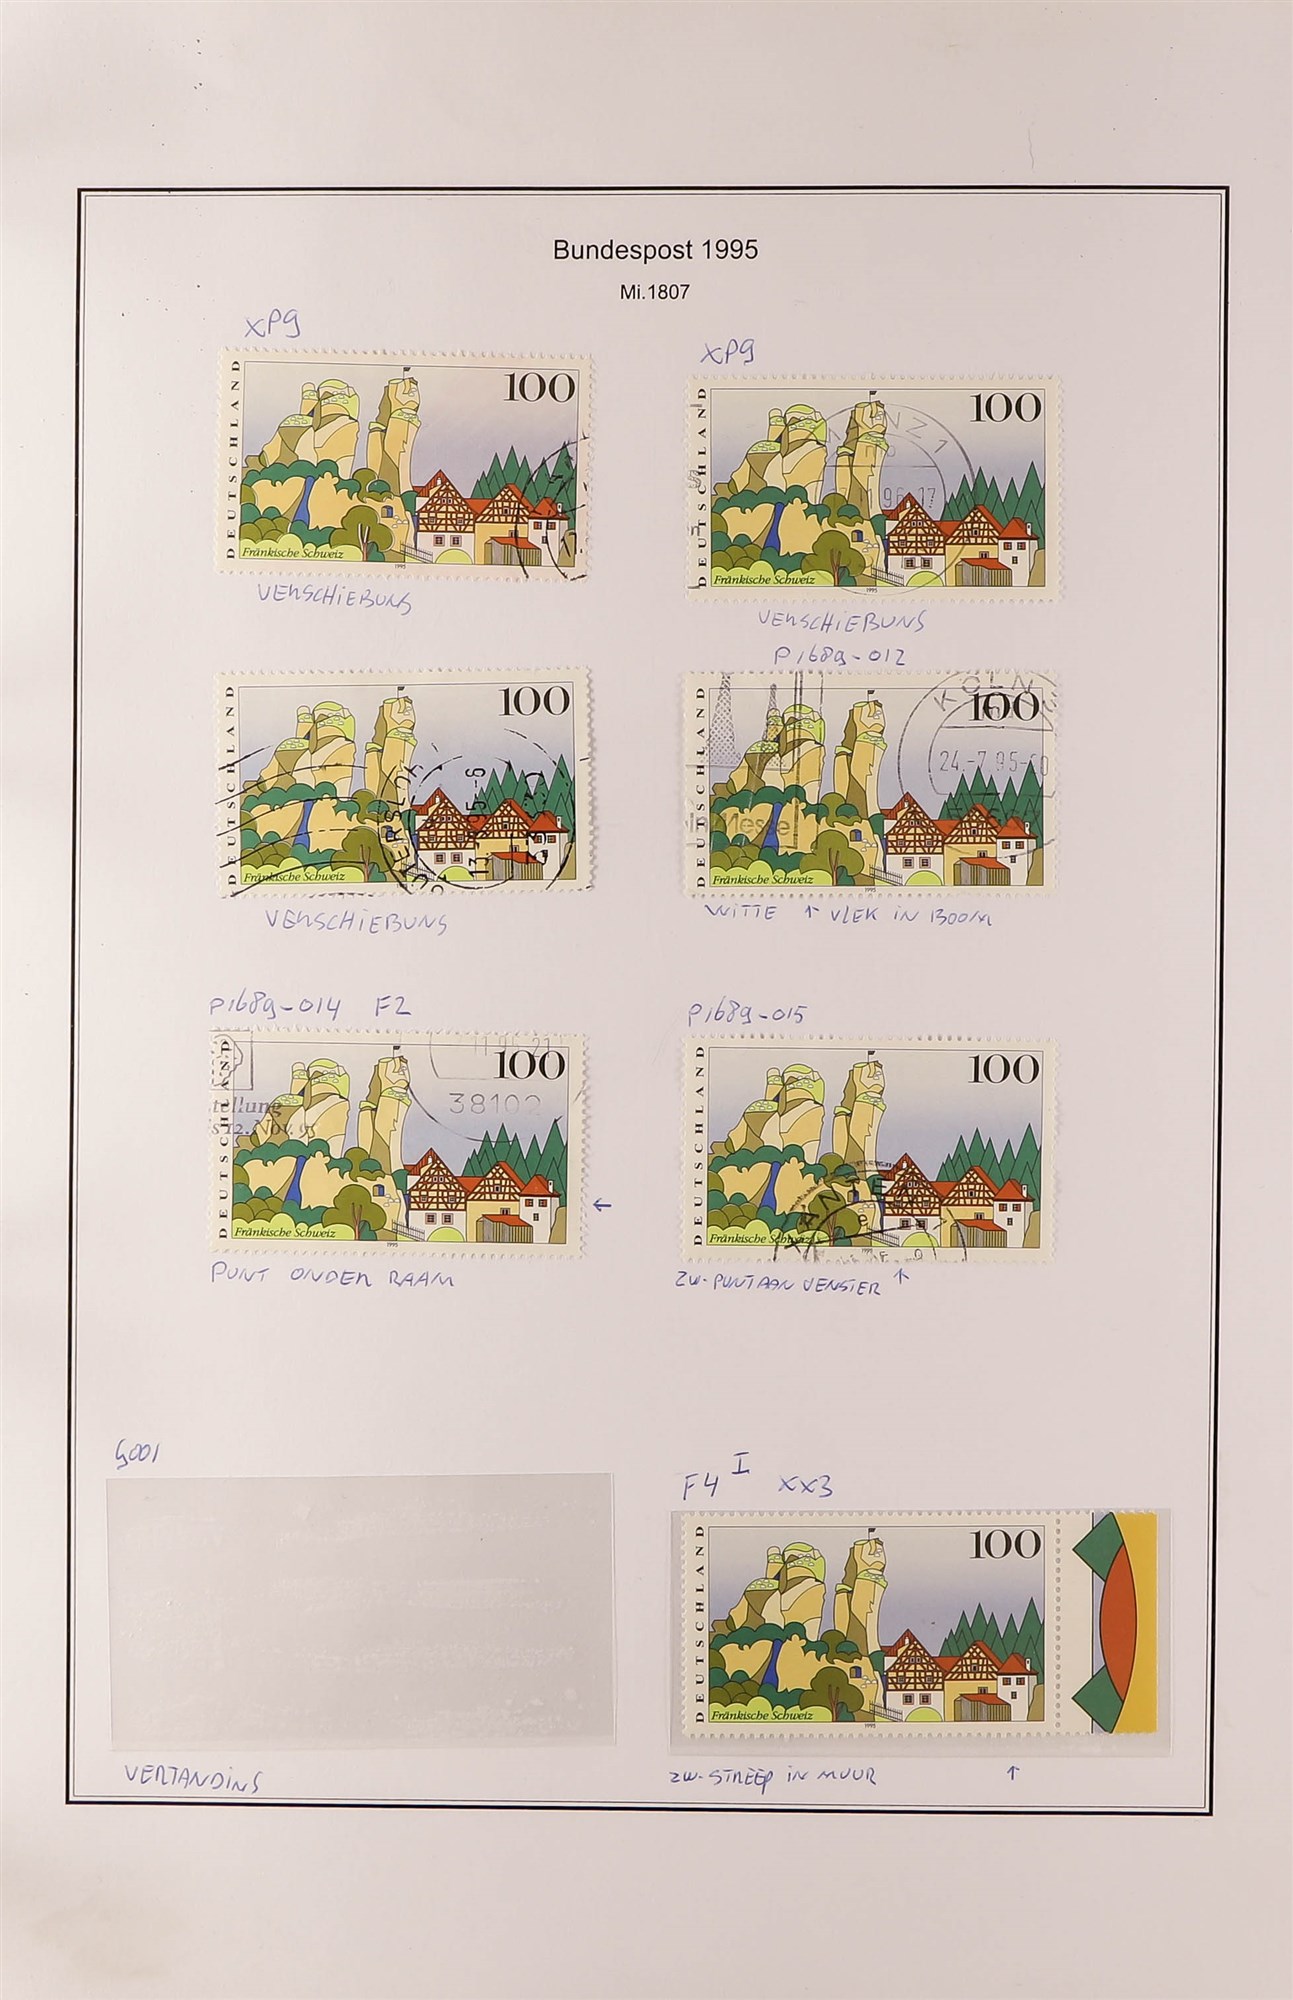 GERMANY WEST 1996 - 1999 SPECIALIZED COLLECTION of over 2000 mint, never hinged mint and used - Image 32 of 35